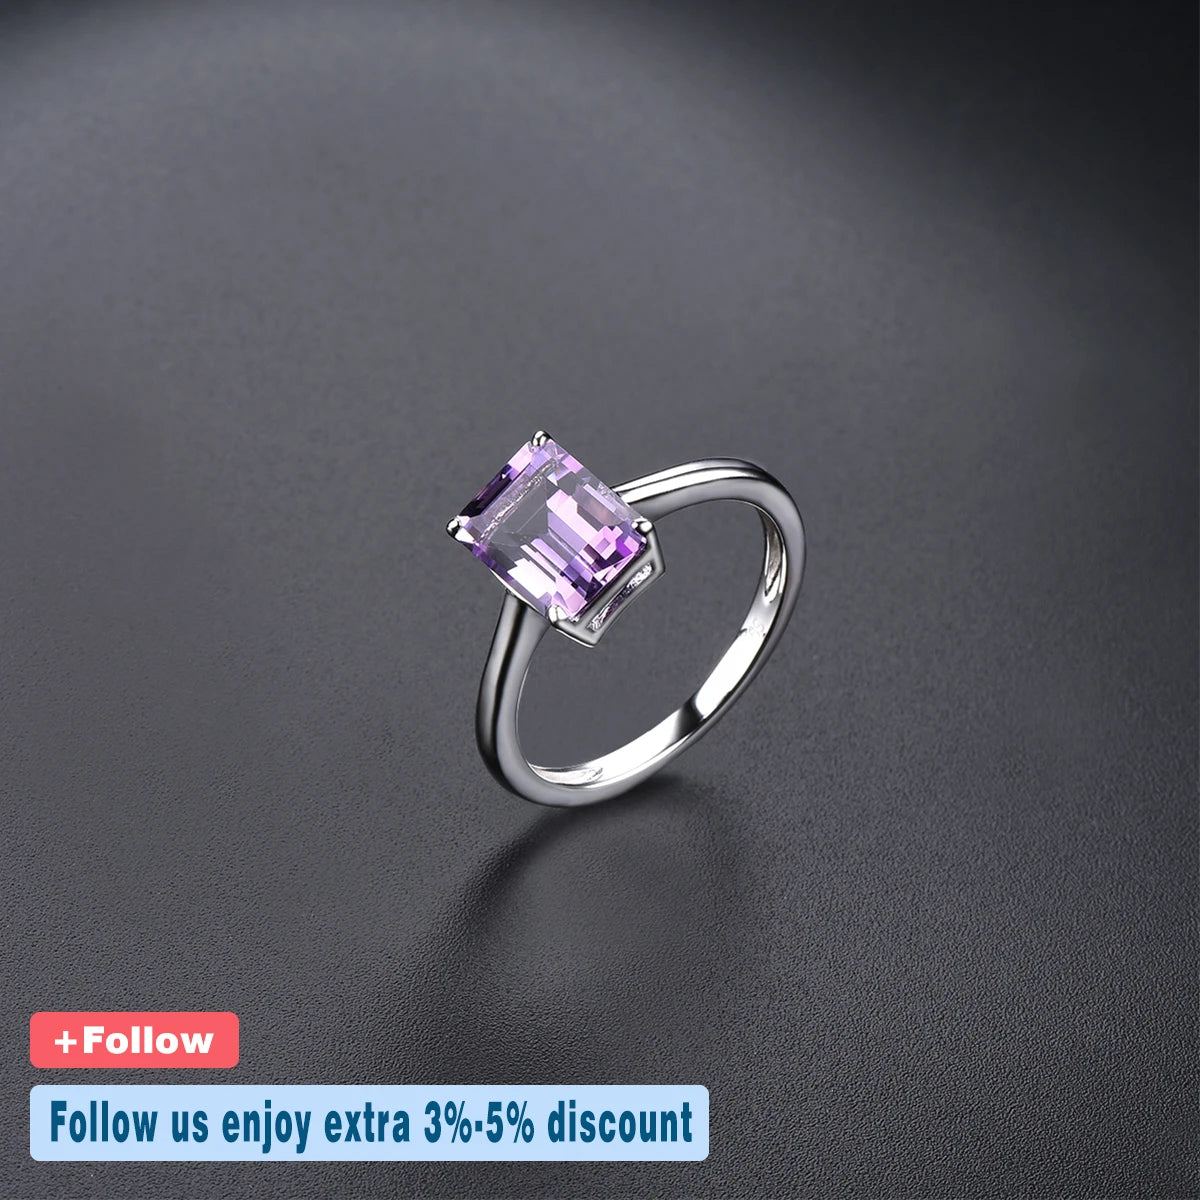 Natural African Amethyst Silver Women's Ring 2.39 Carat Octagon Cut Purple Crystal Classic Design Women Birthday Christmas Gift